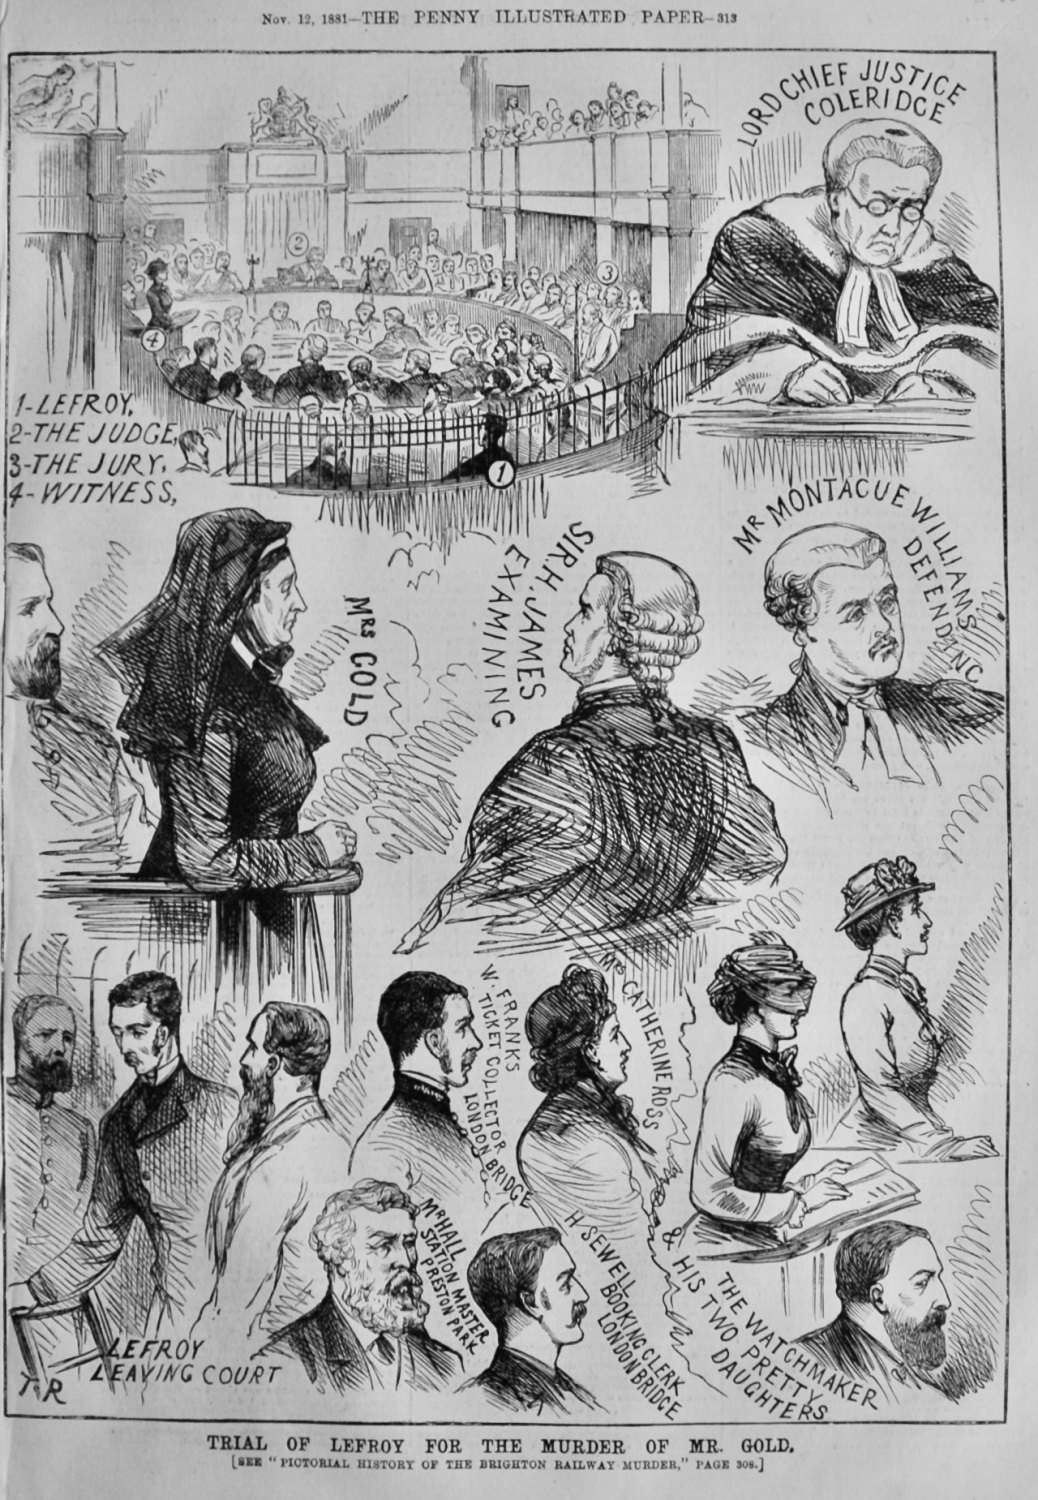 Trial of Lefroy for the Murder of Mr. Gold.  1881. (Brighton Railway Murder